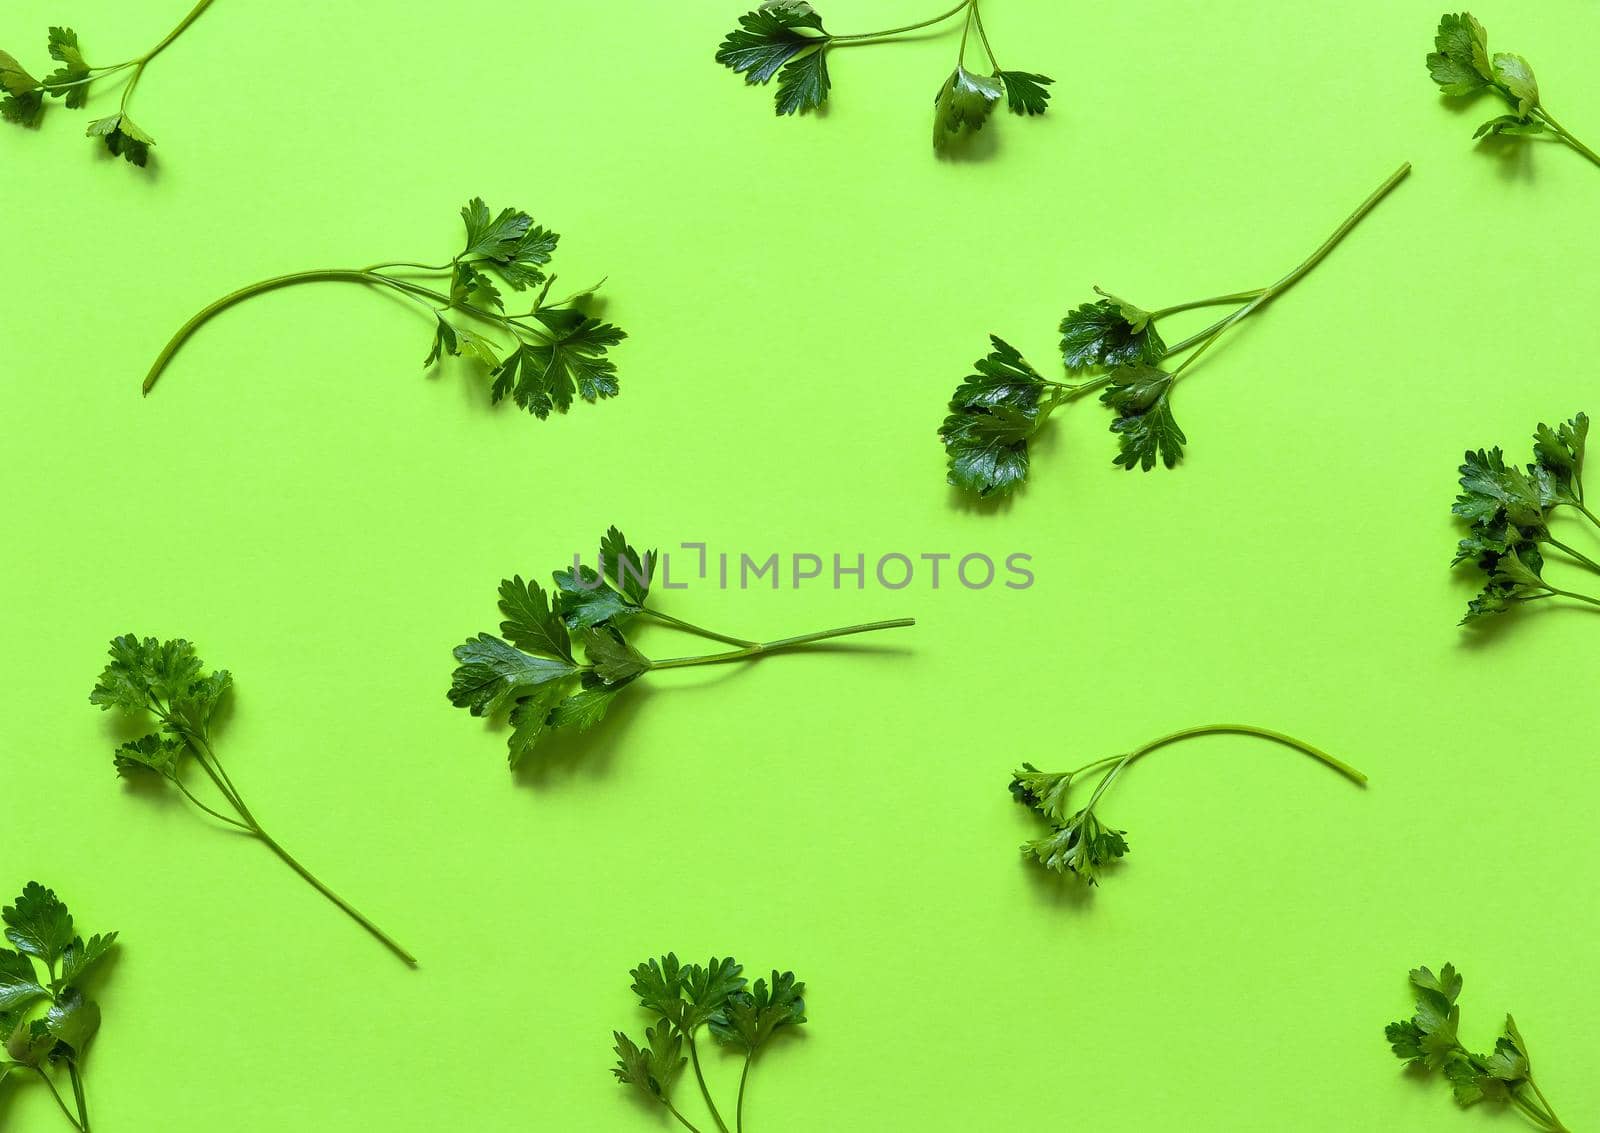 Parsley isolated. Pattern of parsley on a green background. Juicy bright green parsley leaves. Herbs flat lay, top view.